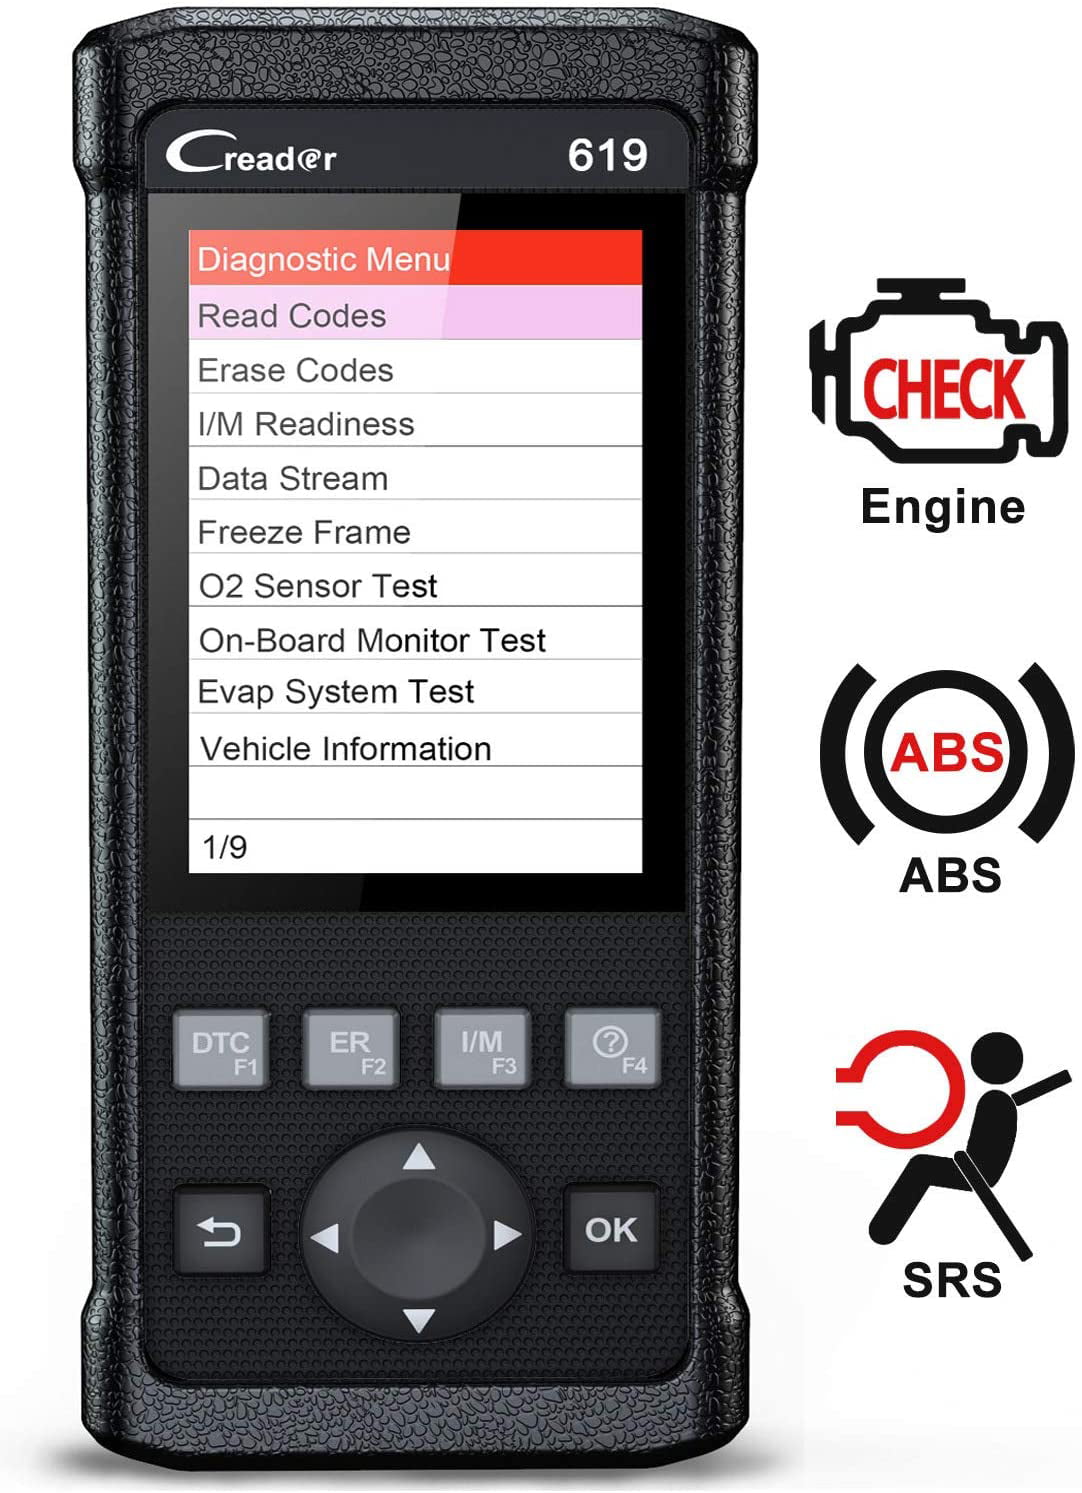 LAUNCH Creader 619 OBD2 Code Reader ABS SRS Engine Scan Auto Diagnostic Tool 